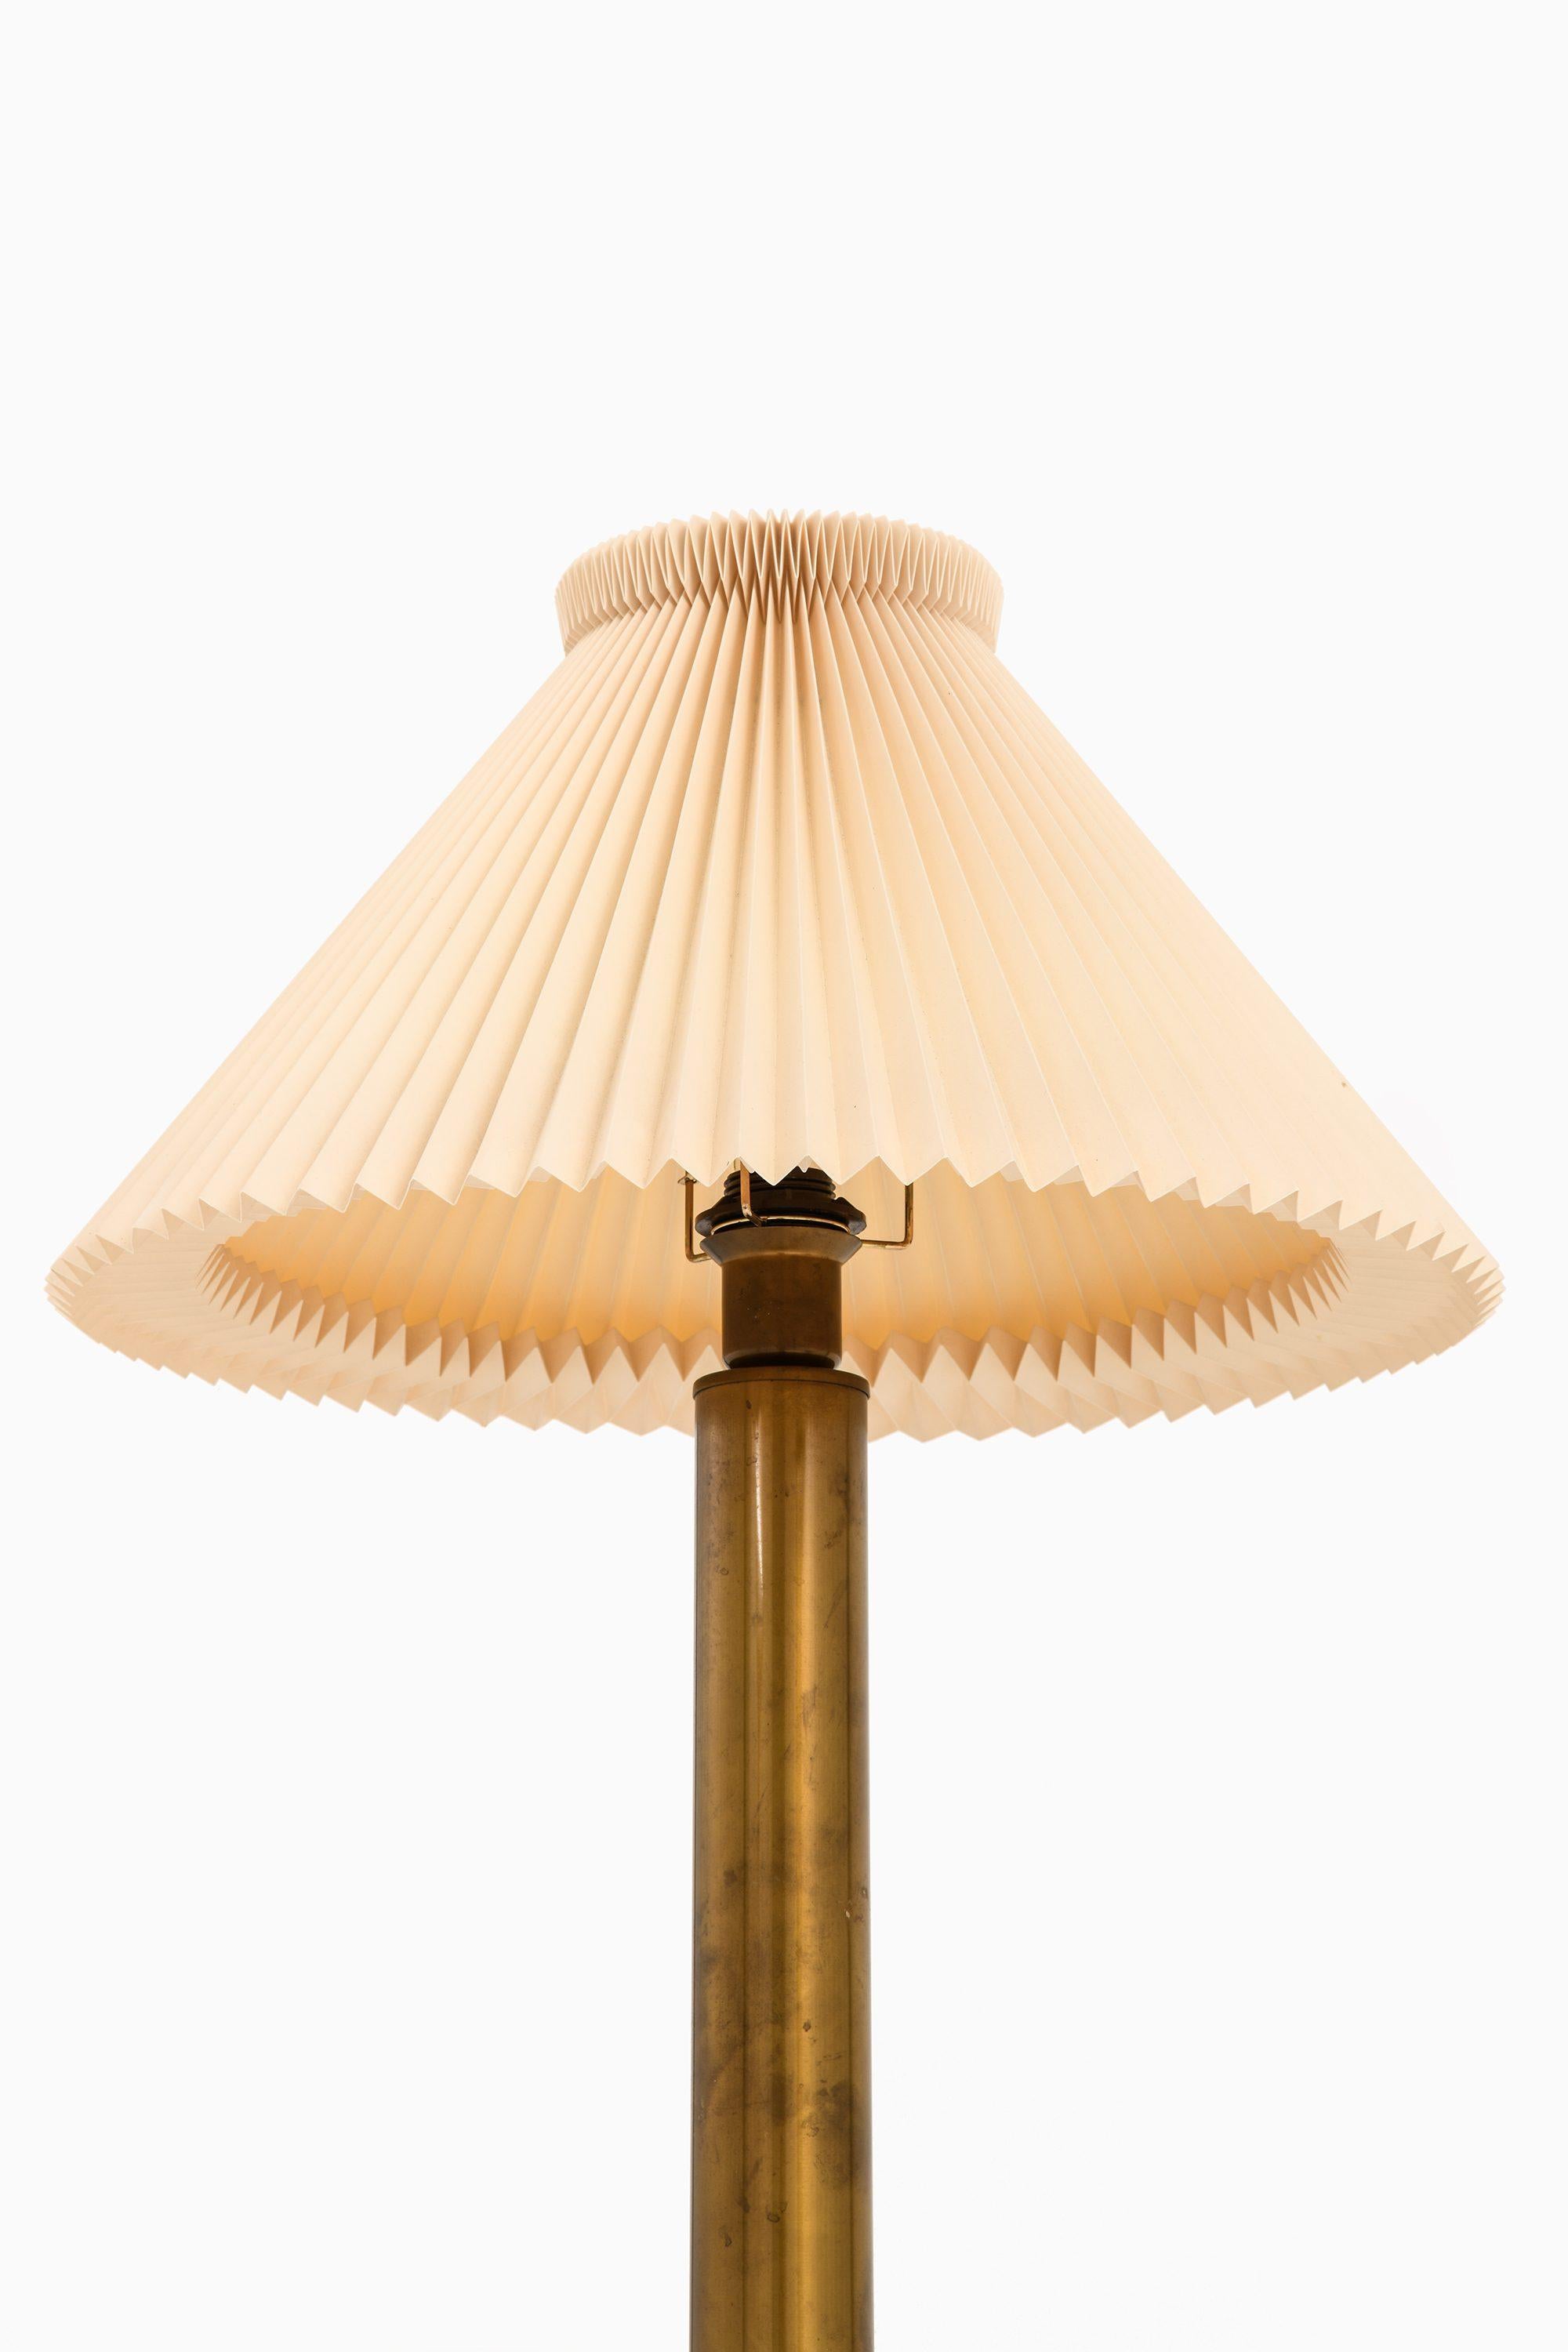 Pair of Table Lamps in Brass, 1950’s

Additional Information:
Material: Brass
Style: Mid century, Scandinavian
Produced by Elarmatur Kosta in Sweden
Dimensions (W x D x H): 12.5 x 12.5 x 47.5 cm
Condition: Good vintage condition, with signs of